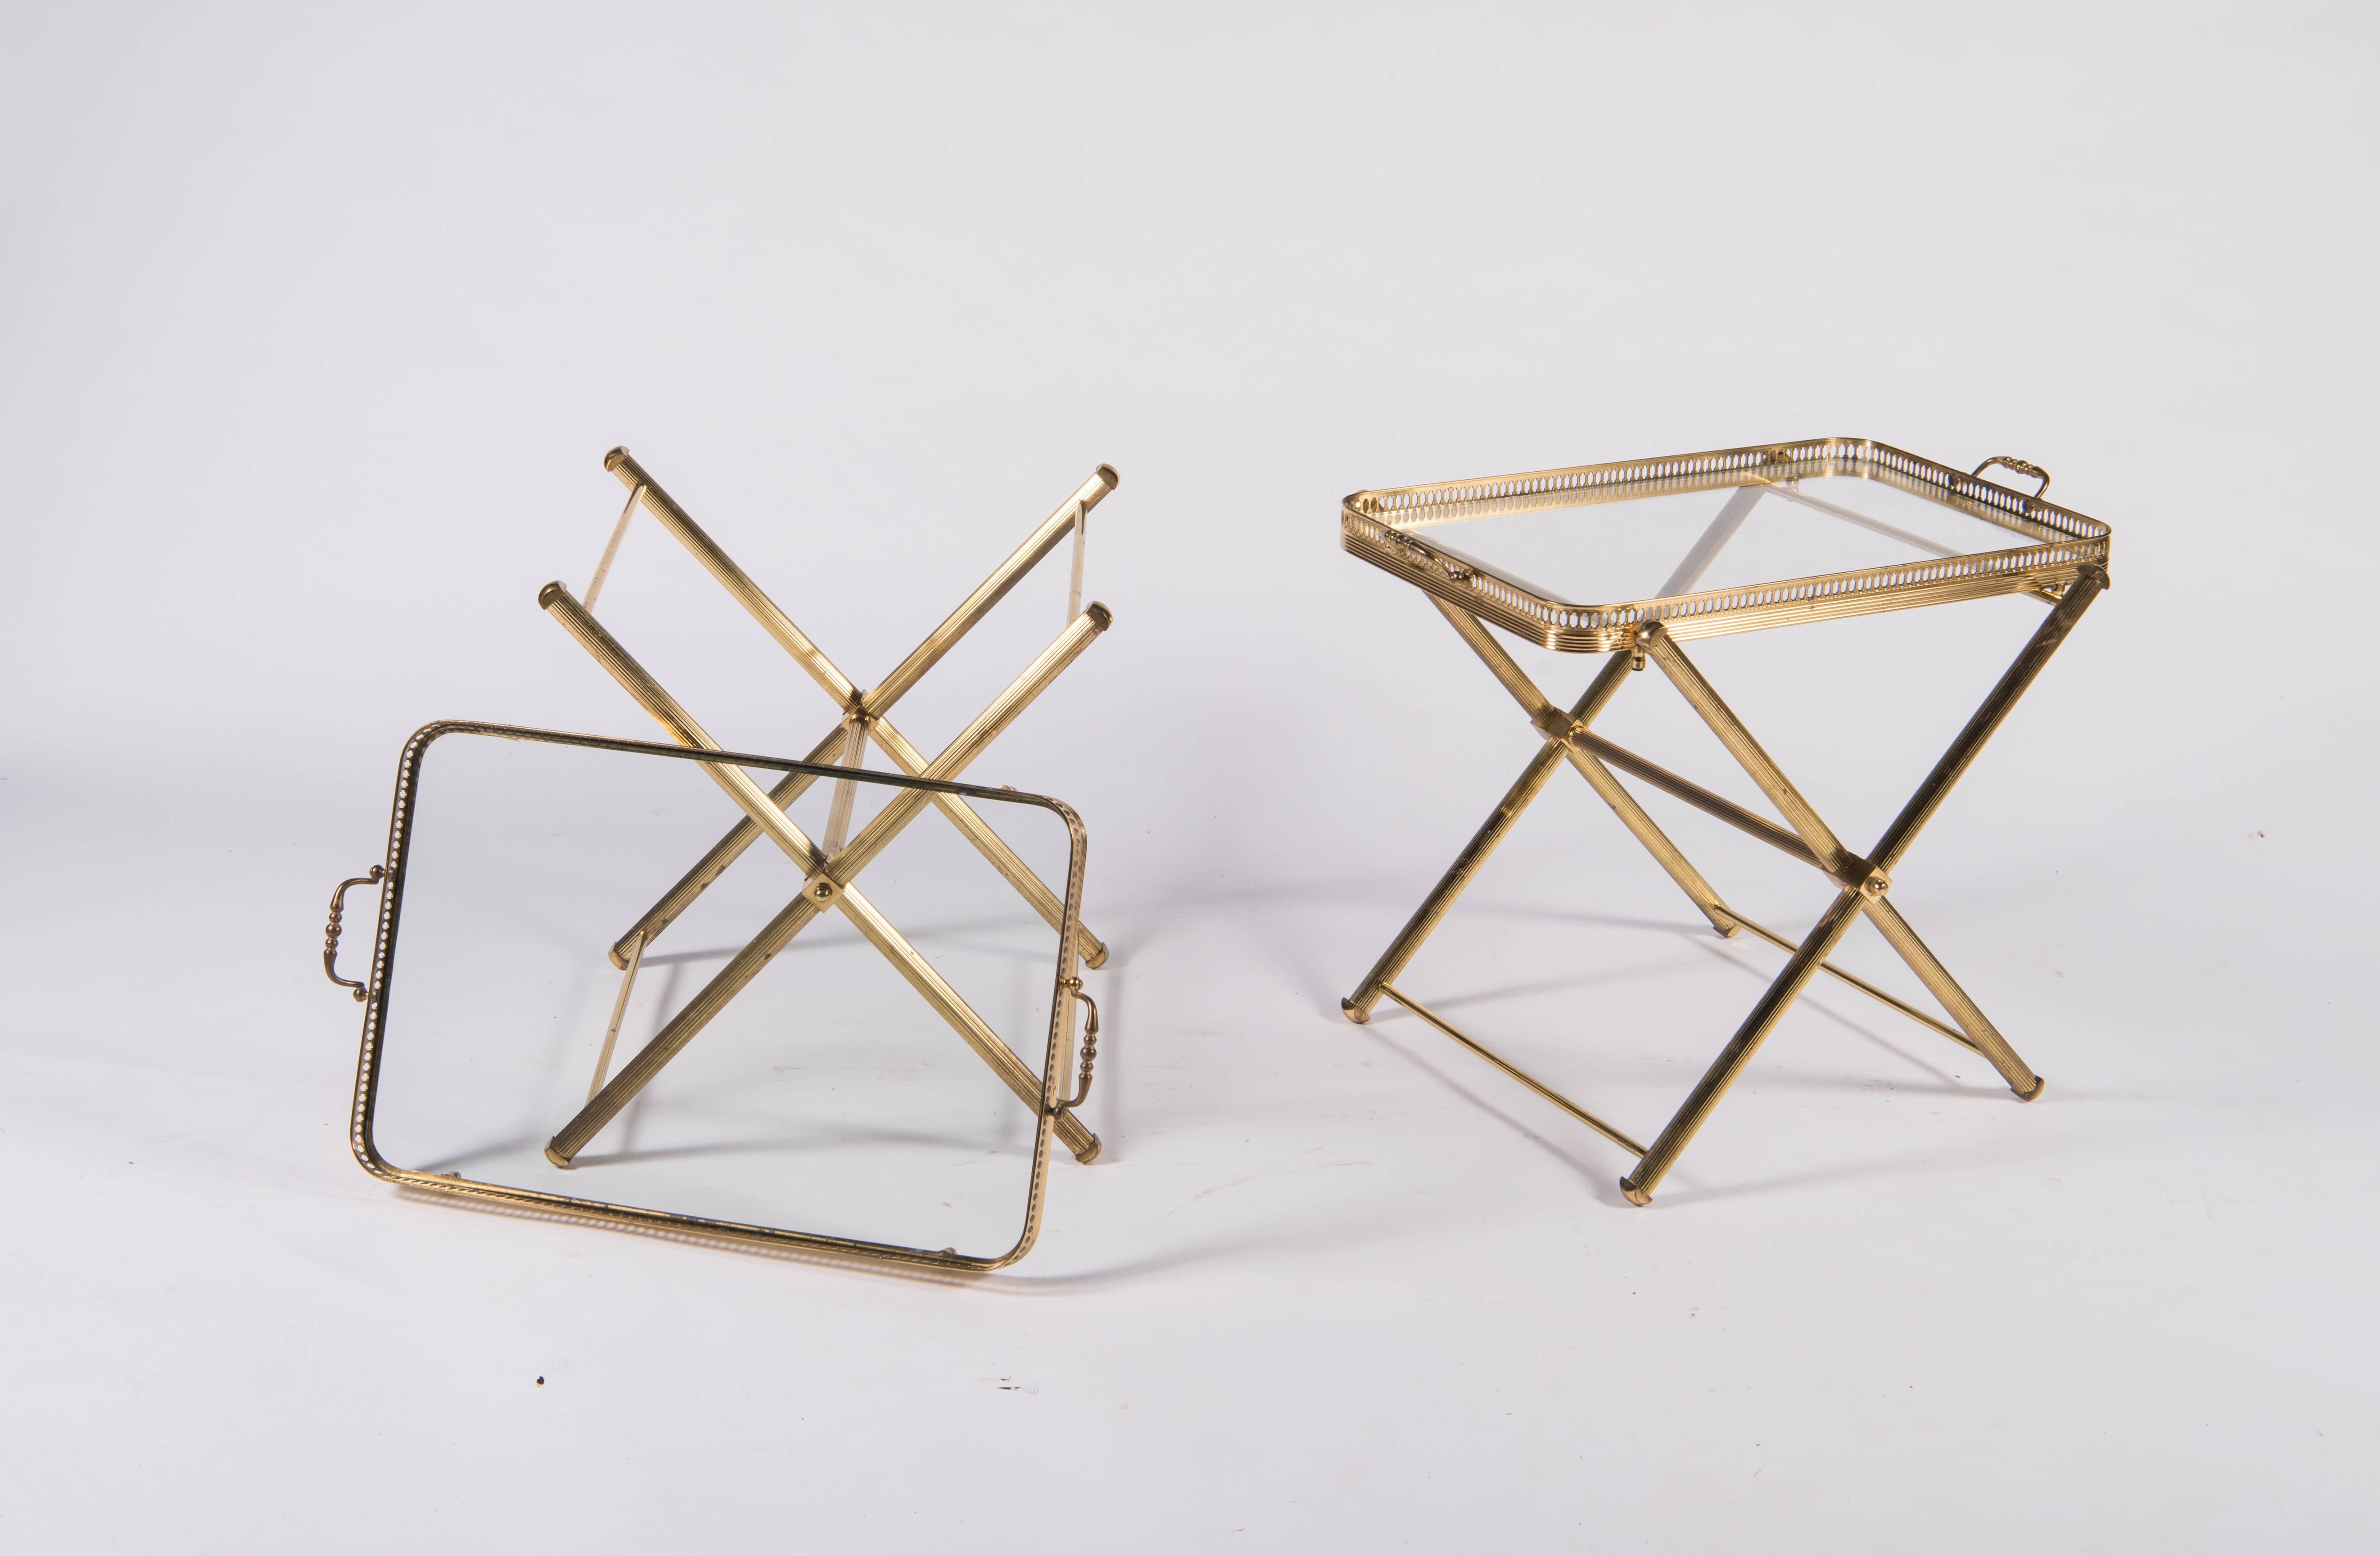 A pair of brass and glass tray tables that fold for easy storage. The frame of channeled tubular brass holds a footed tray with handles. The tray is 14.5 inches x 21 inches with a 1 inch deep brass filigreed gallery surrounding an insert of